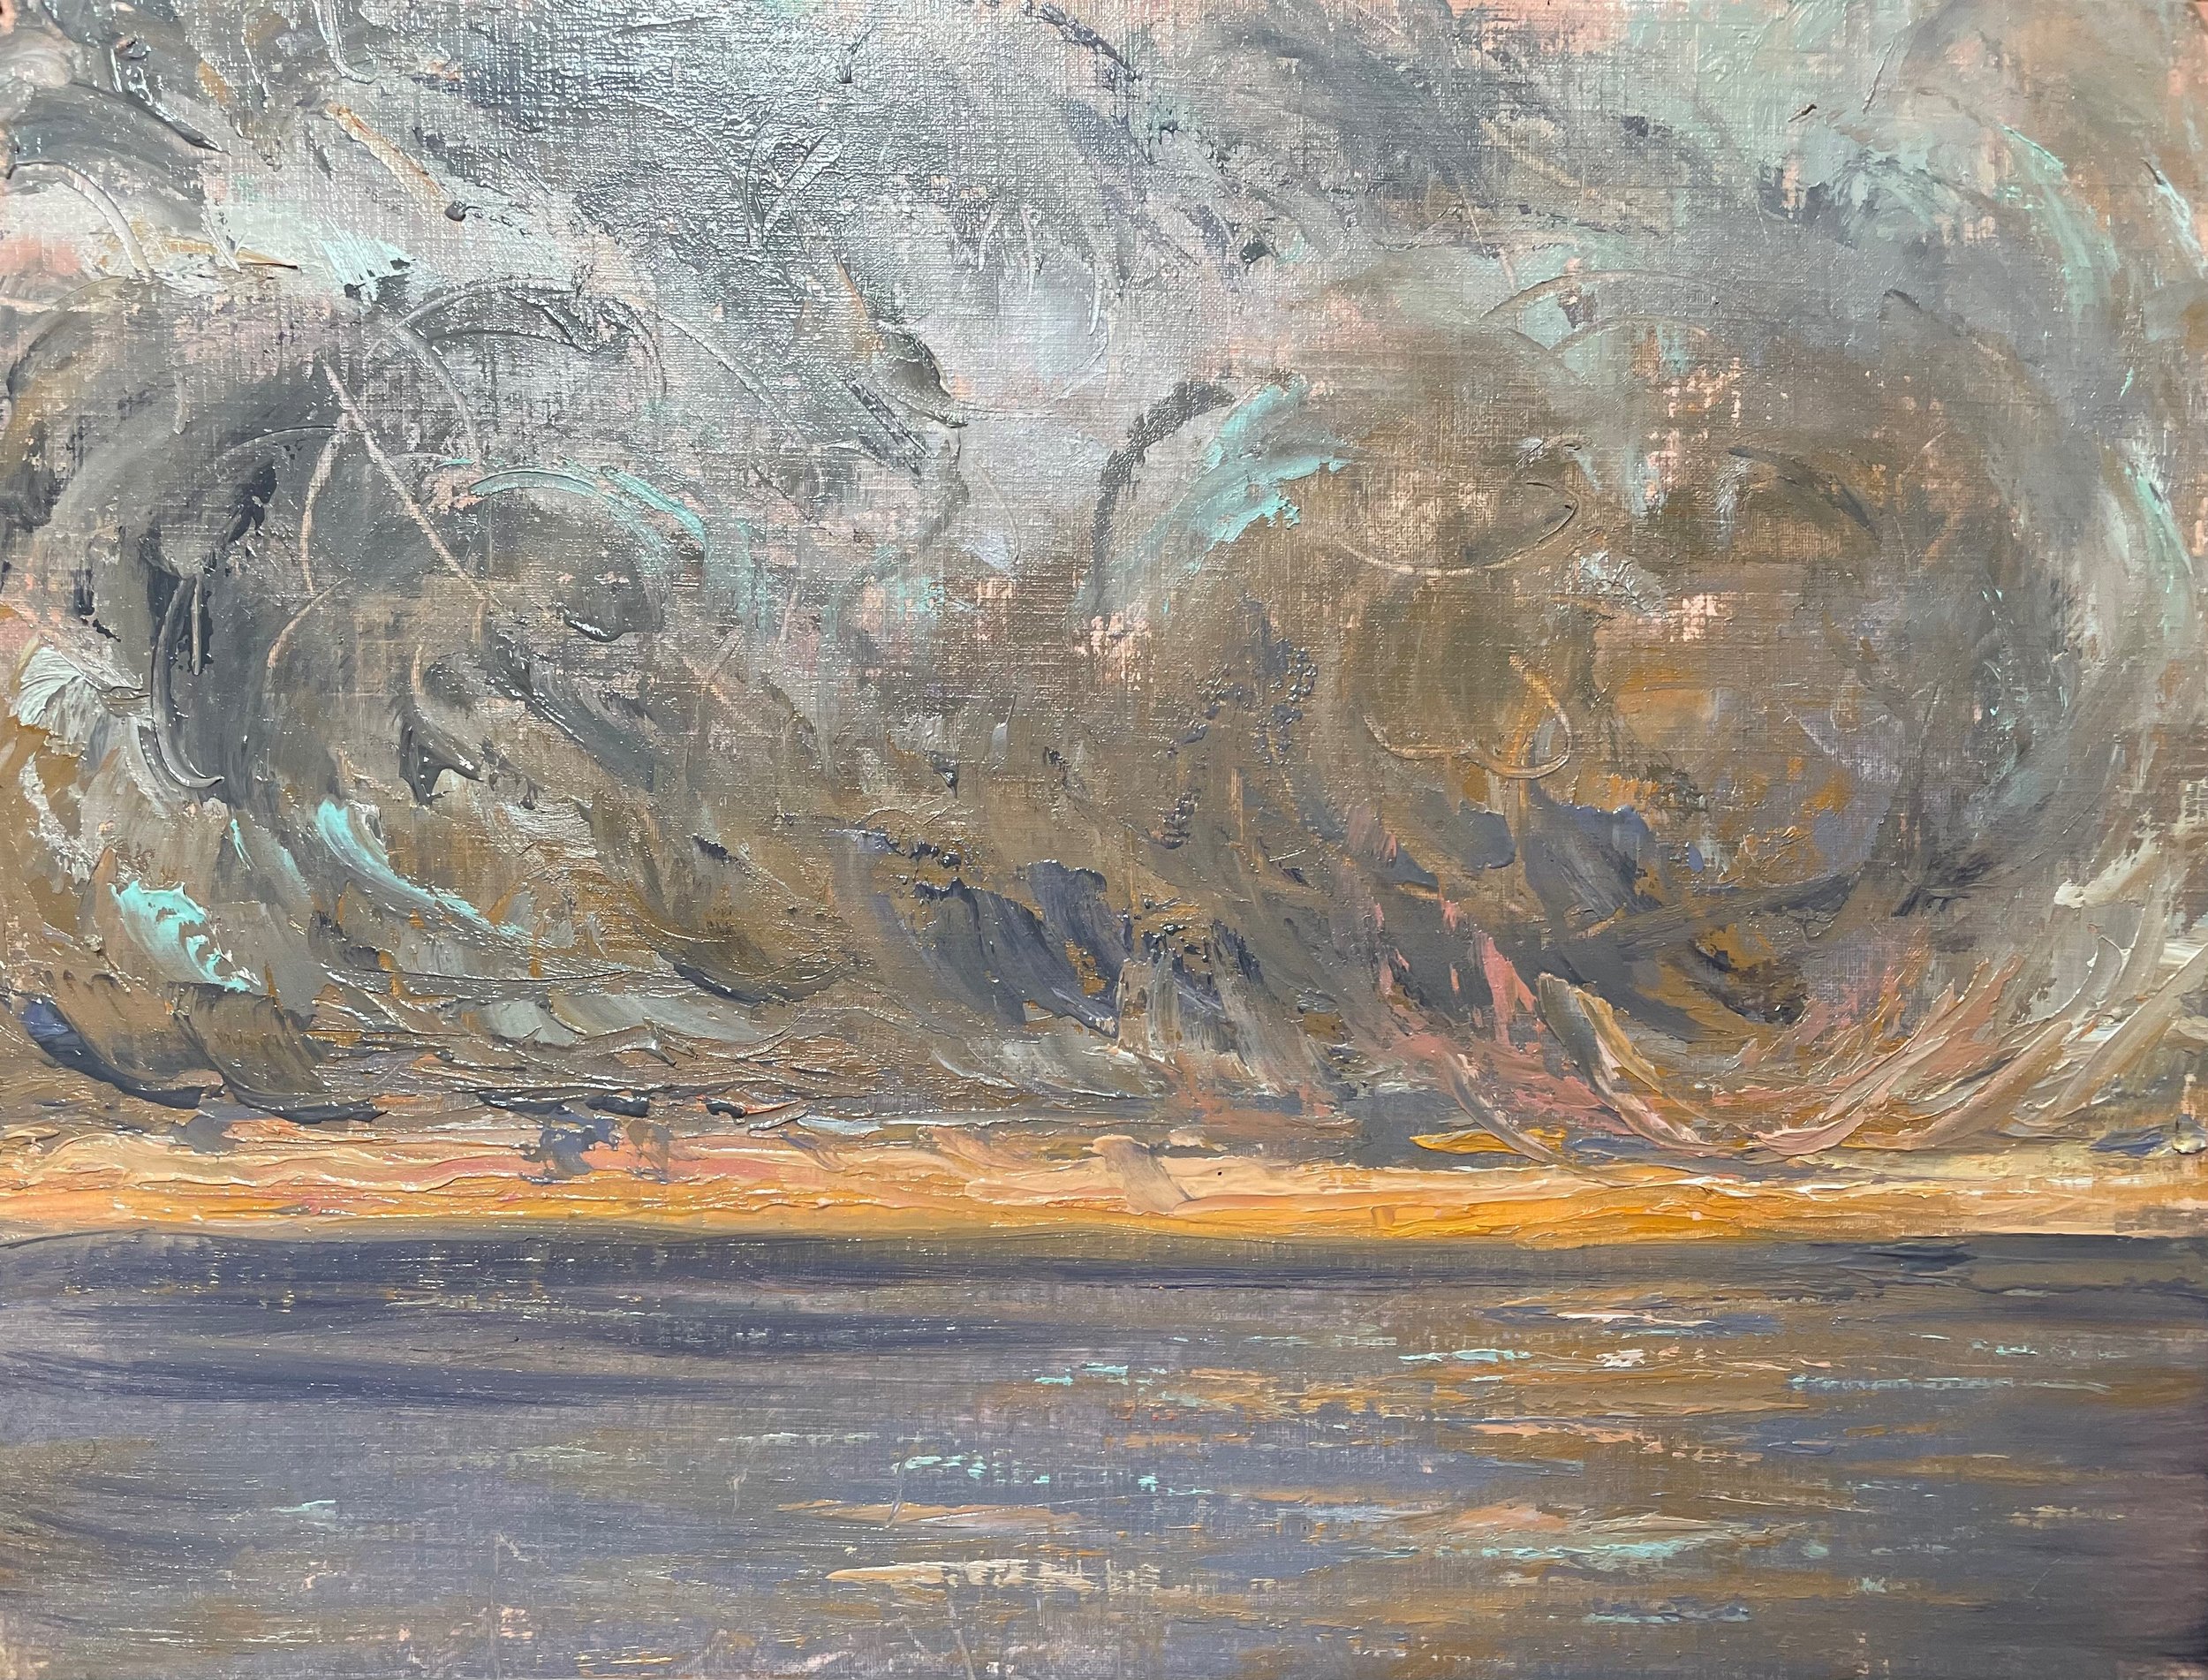 21-02-16    1 of 2  Two quick oil sketches of the sunset    Oil on Gesso Paper     9 x 12 inches.jpg